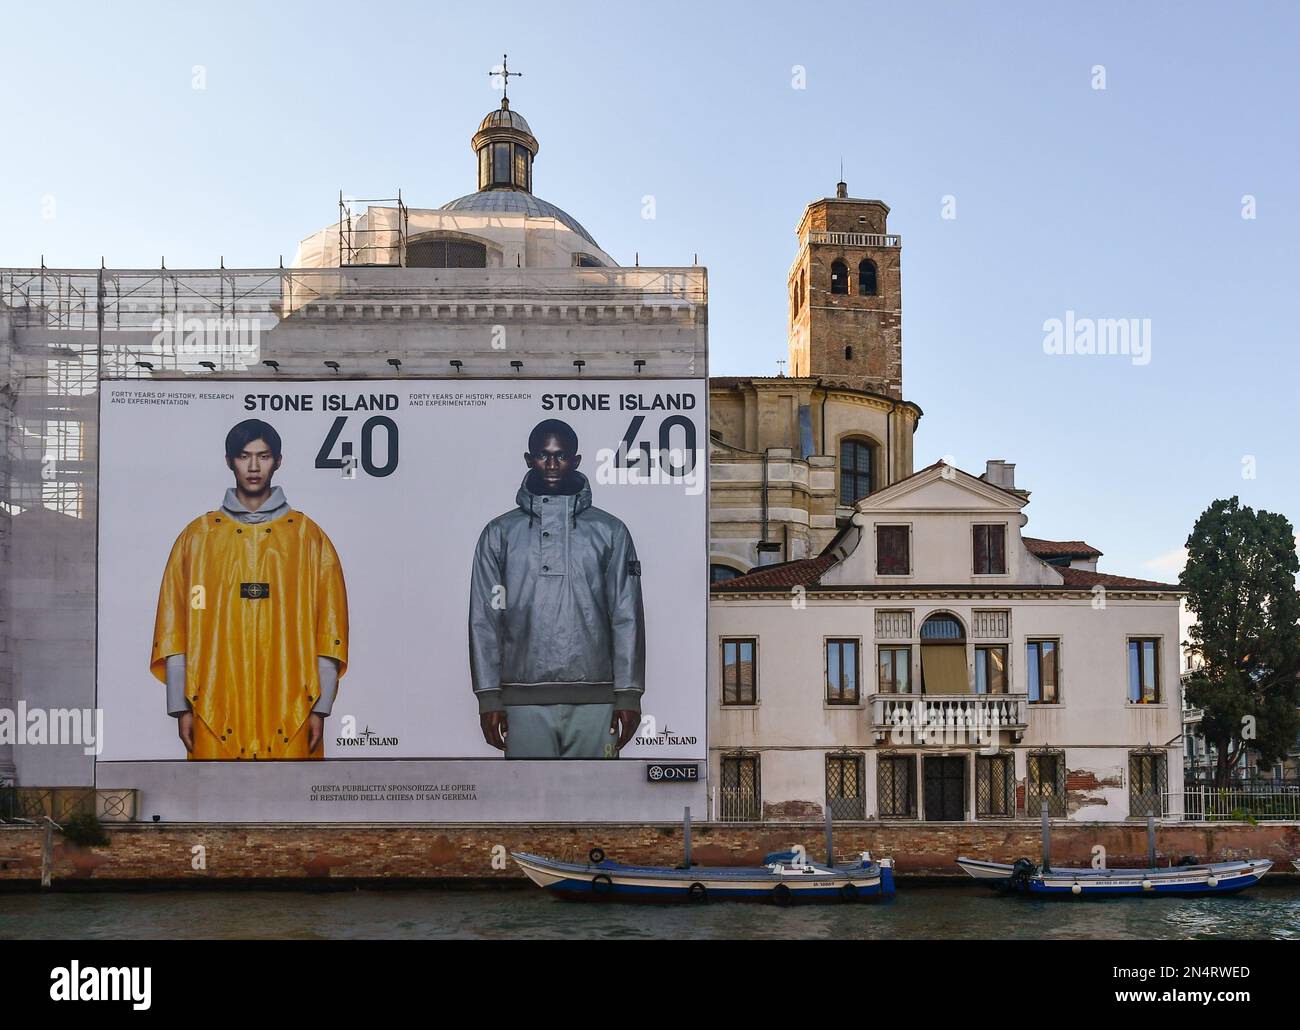 The Church of San Geremia with the facade under restoration covered by a large advertising banner which has caused much controversy, Venice, Italy Stock Photo